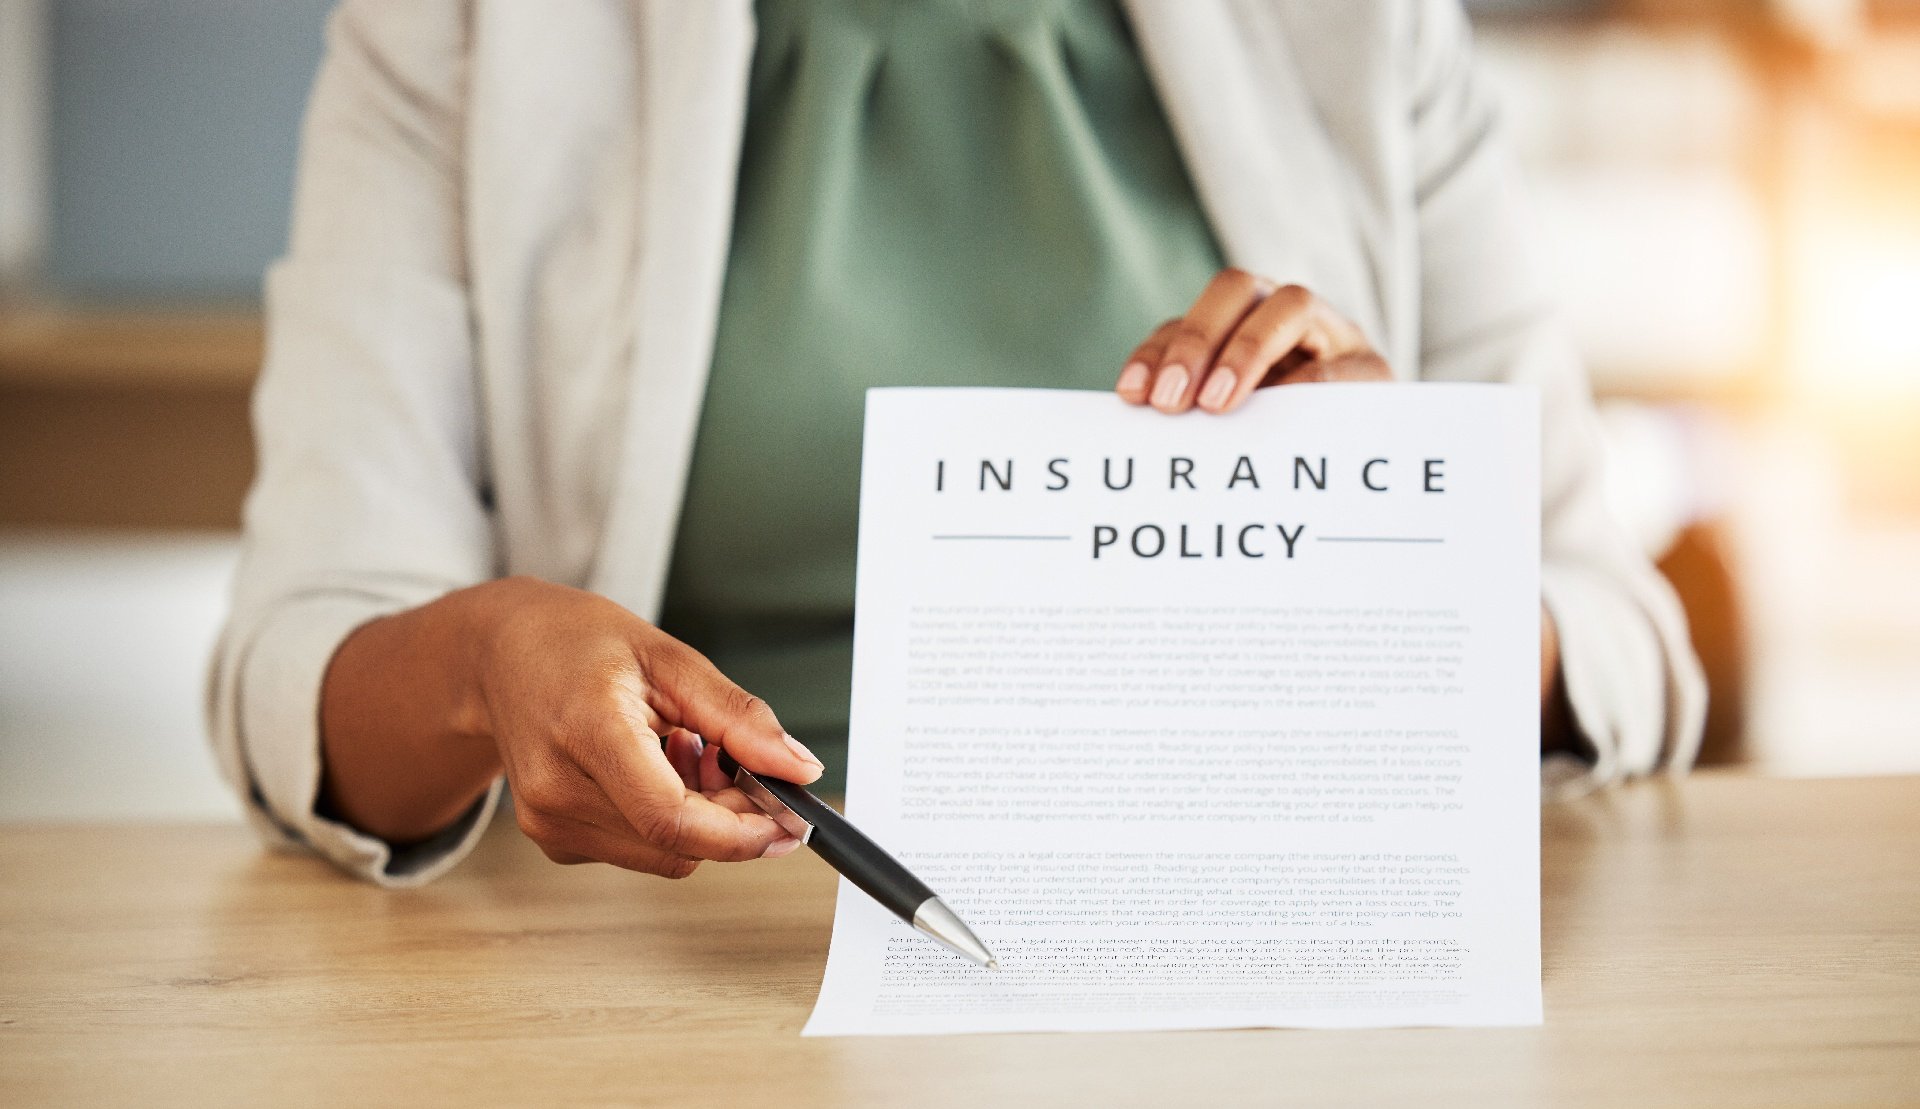 Woman holding insurance policy, gesturing to a section with a pen